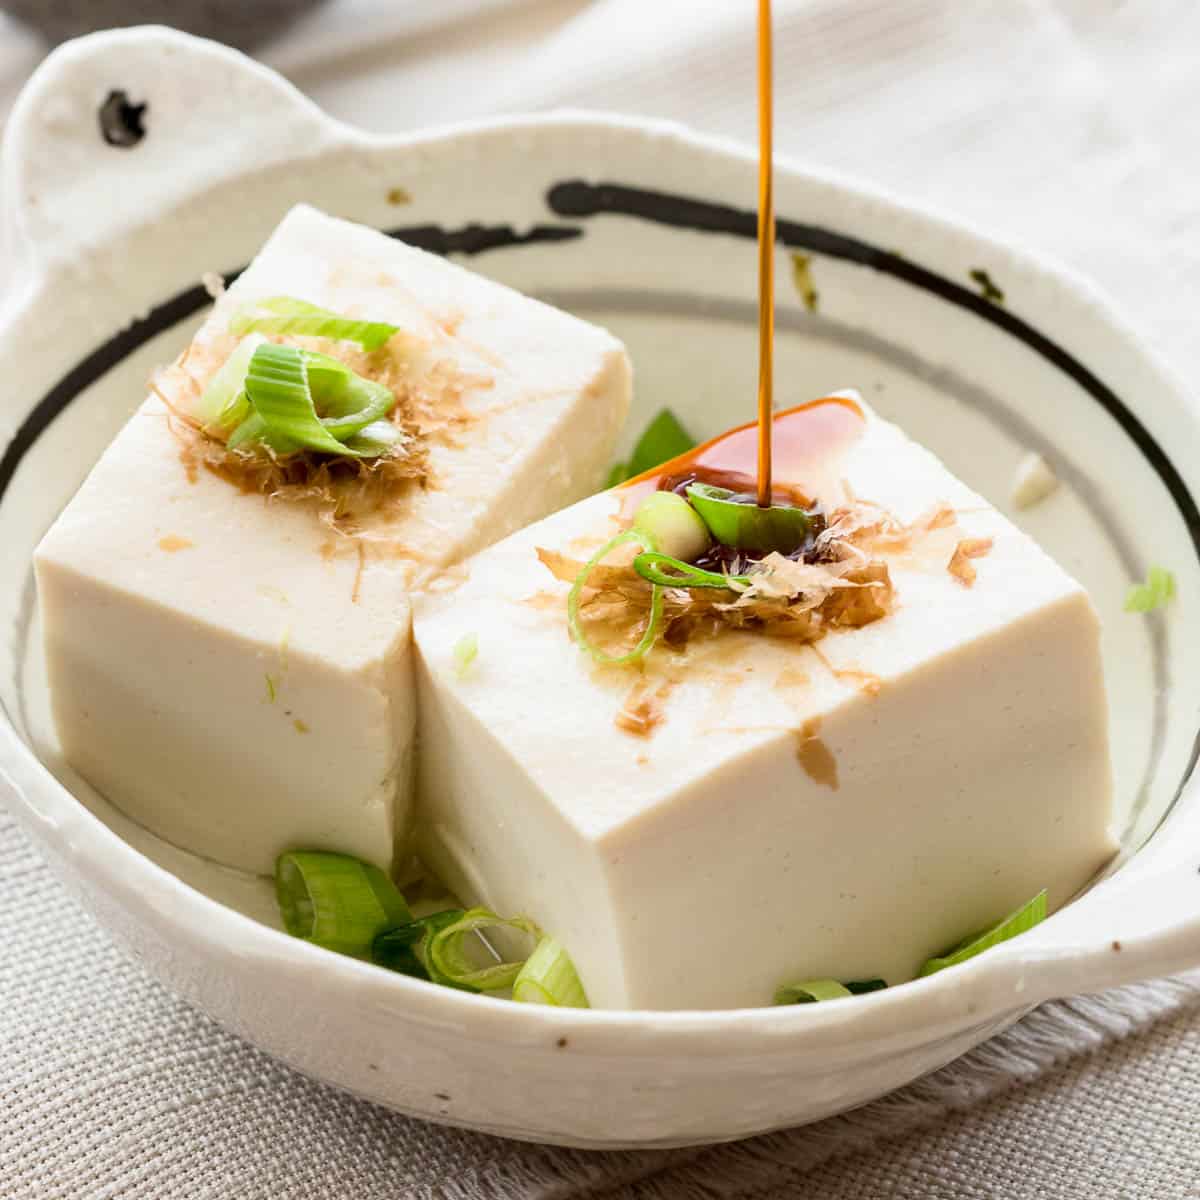 Yudofu or boiled tofu cuisine may seem bland but it's actually not!